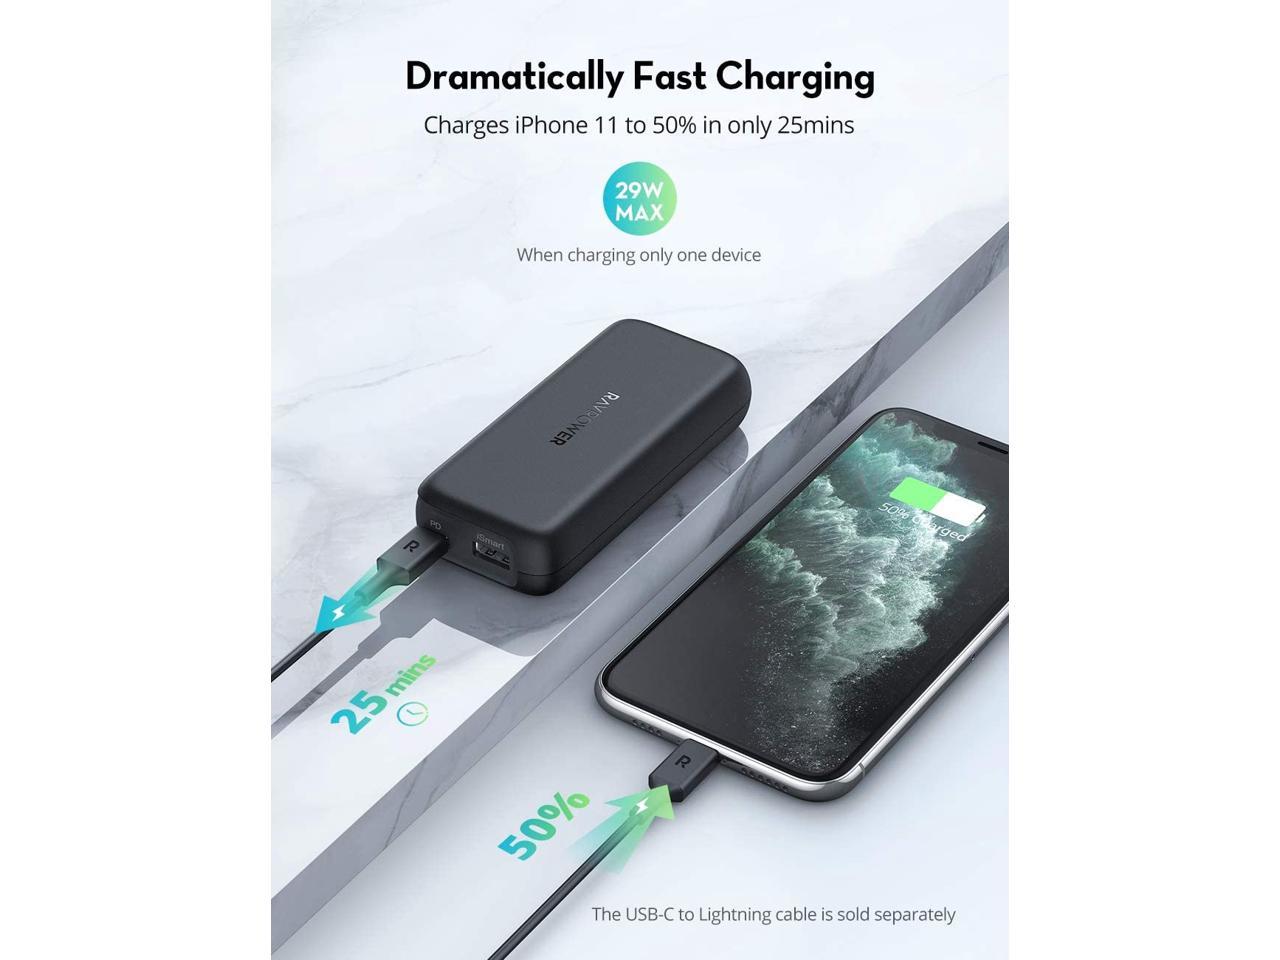 Pixel 4XL/ 3/3XL iPad Pro 2018 and More 10000mAh Small PD Power Bank Compatible with iPhone 11/Pro/Max/ 8/ X/XS 29W Max Portable Charger RAVPower 10000 USB C Power Delivery Samsung S10 